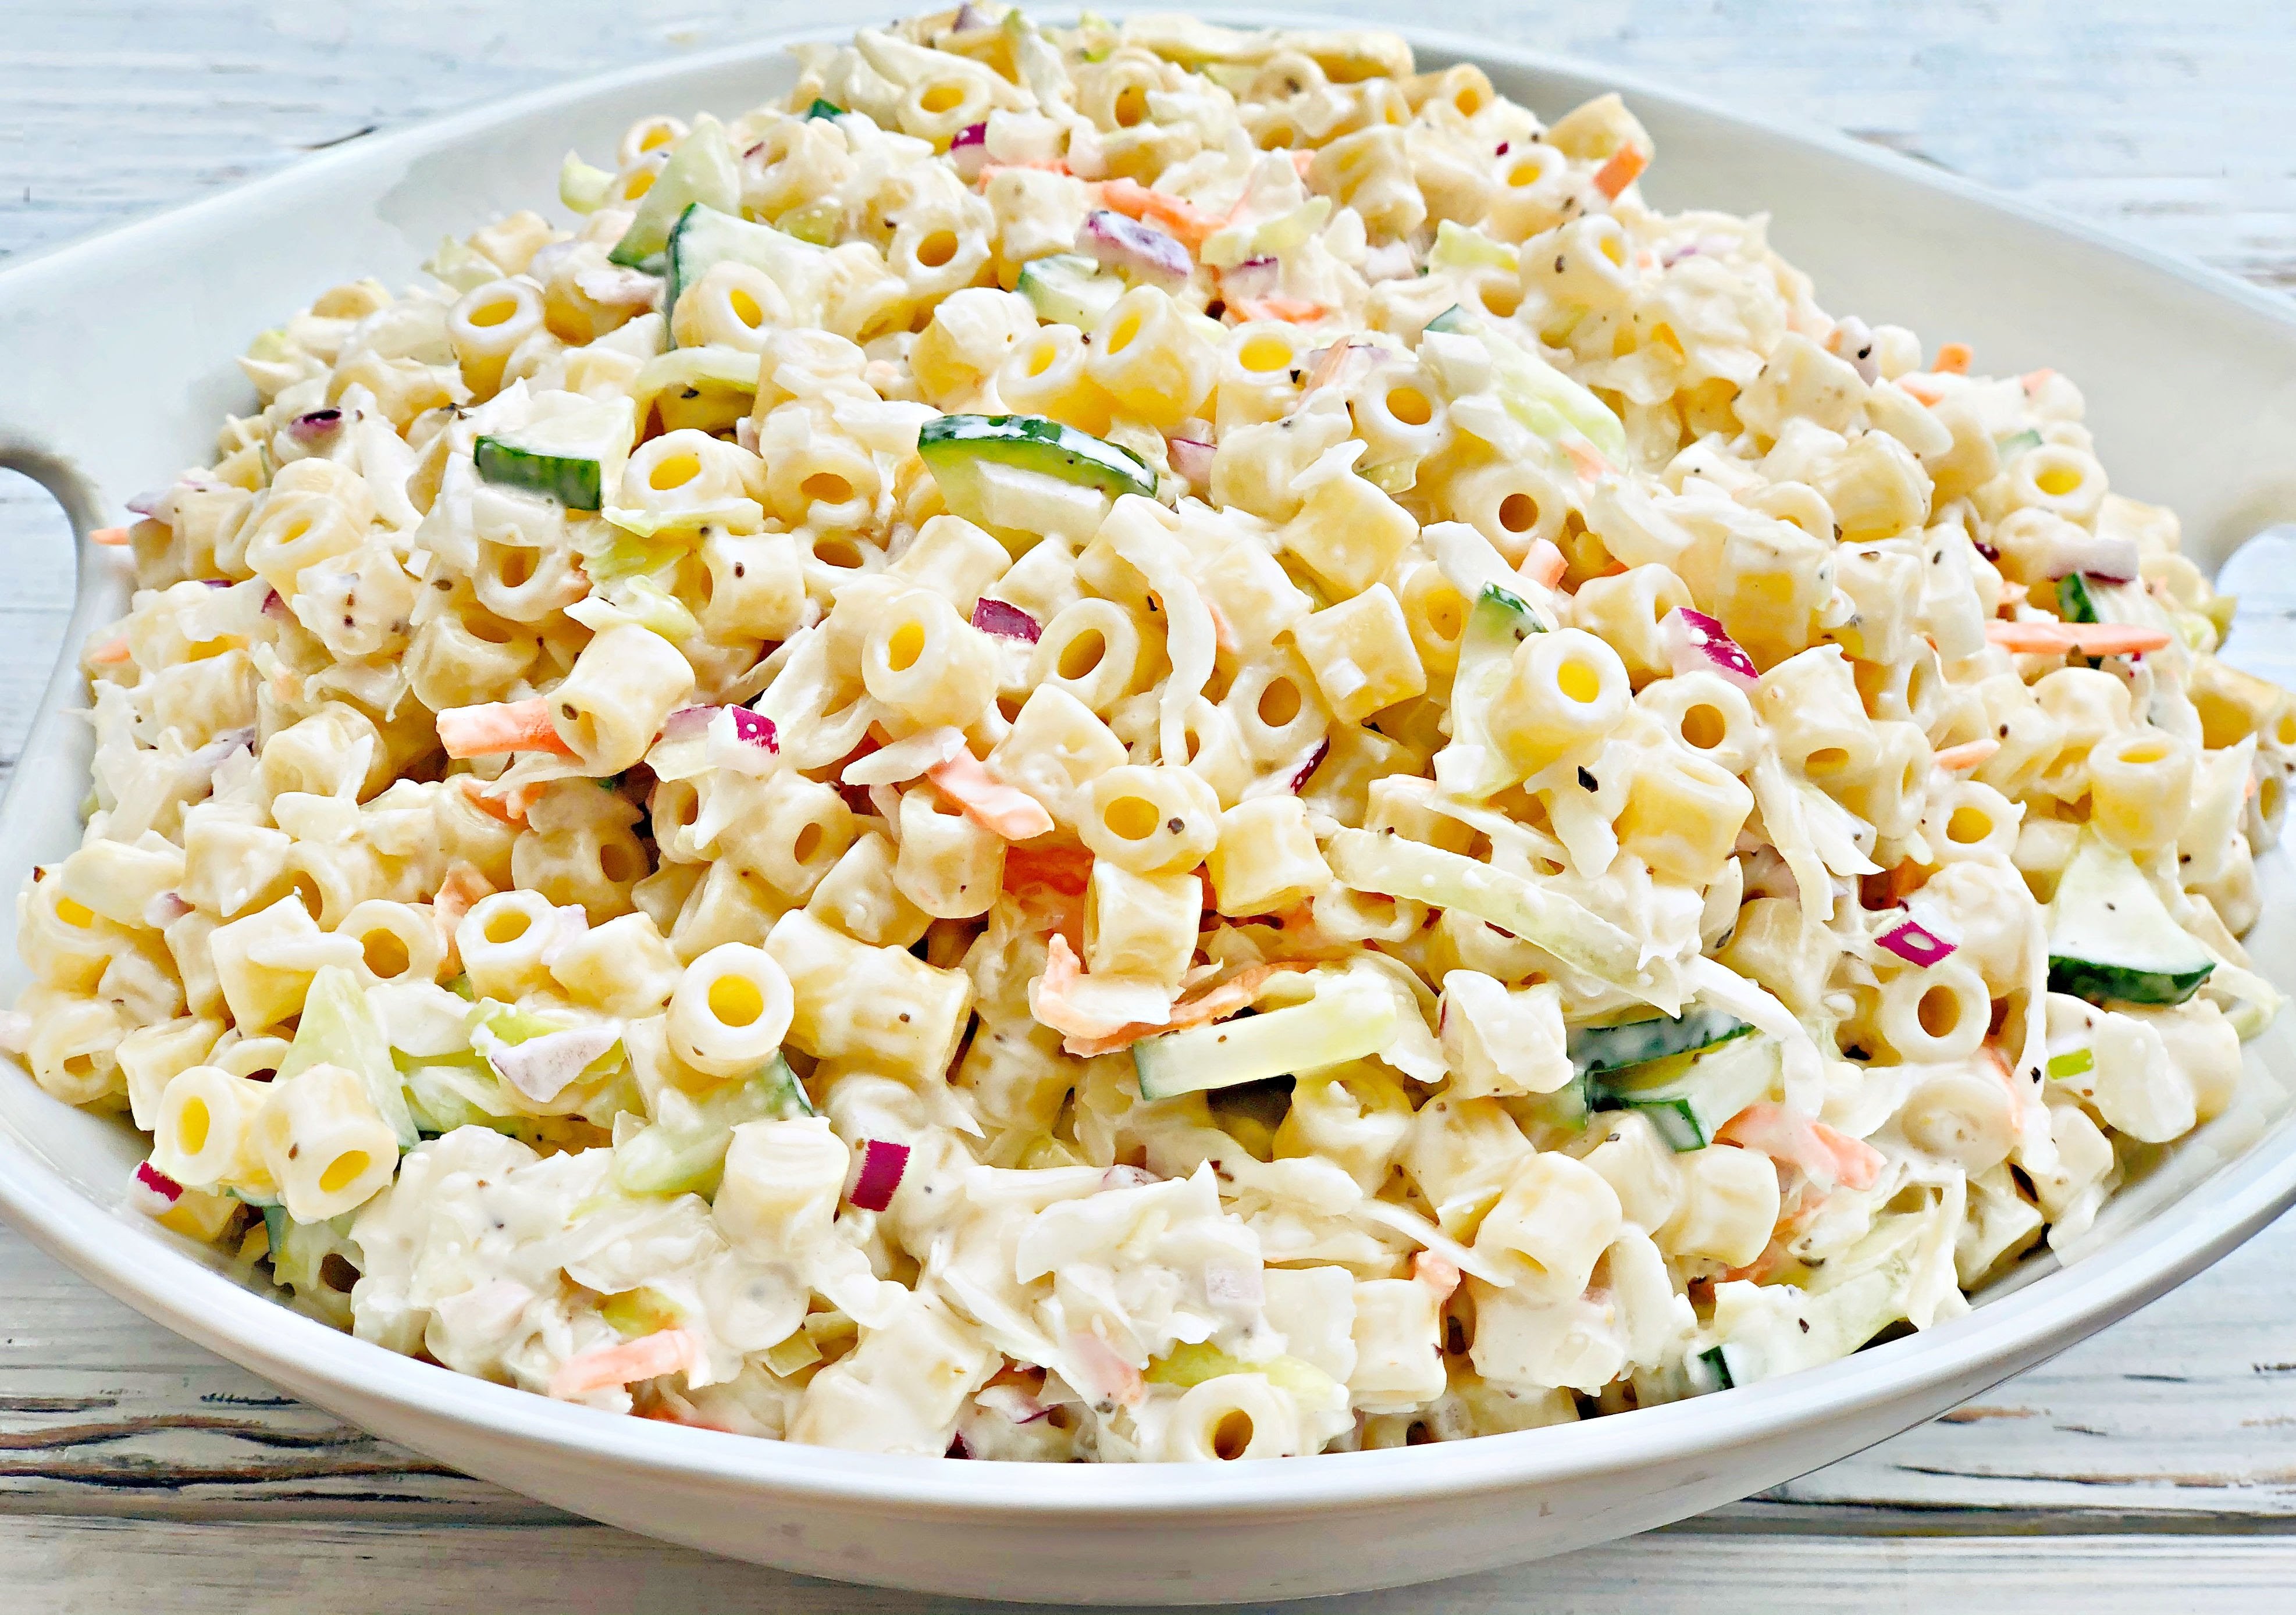 Coleslaw Pasta Salad - An easy, make-ahead side dish recipe perfect for backyard barbecues, potlucks, and holiday gatherings! via @thiswifecooks